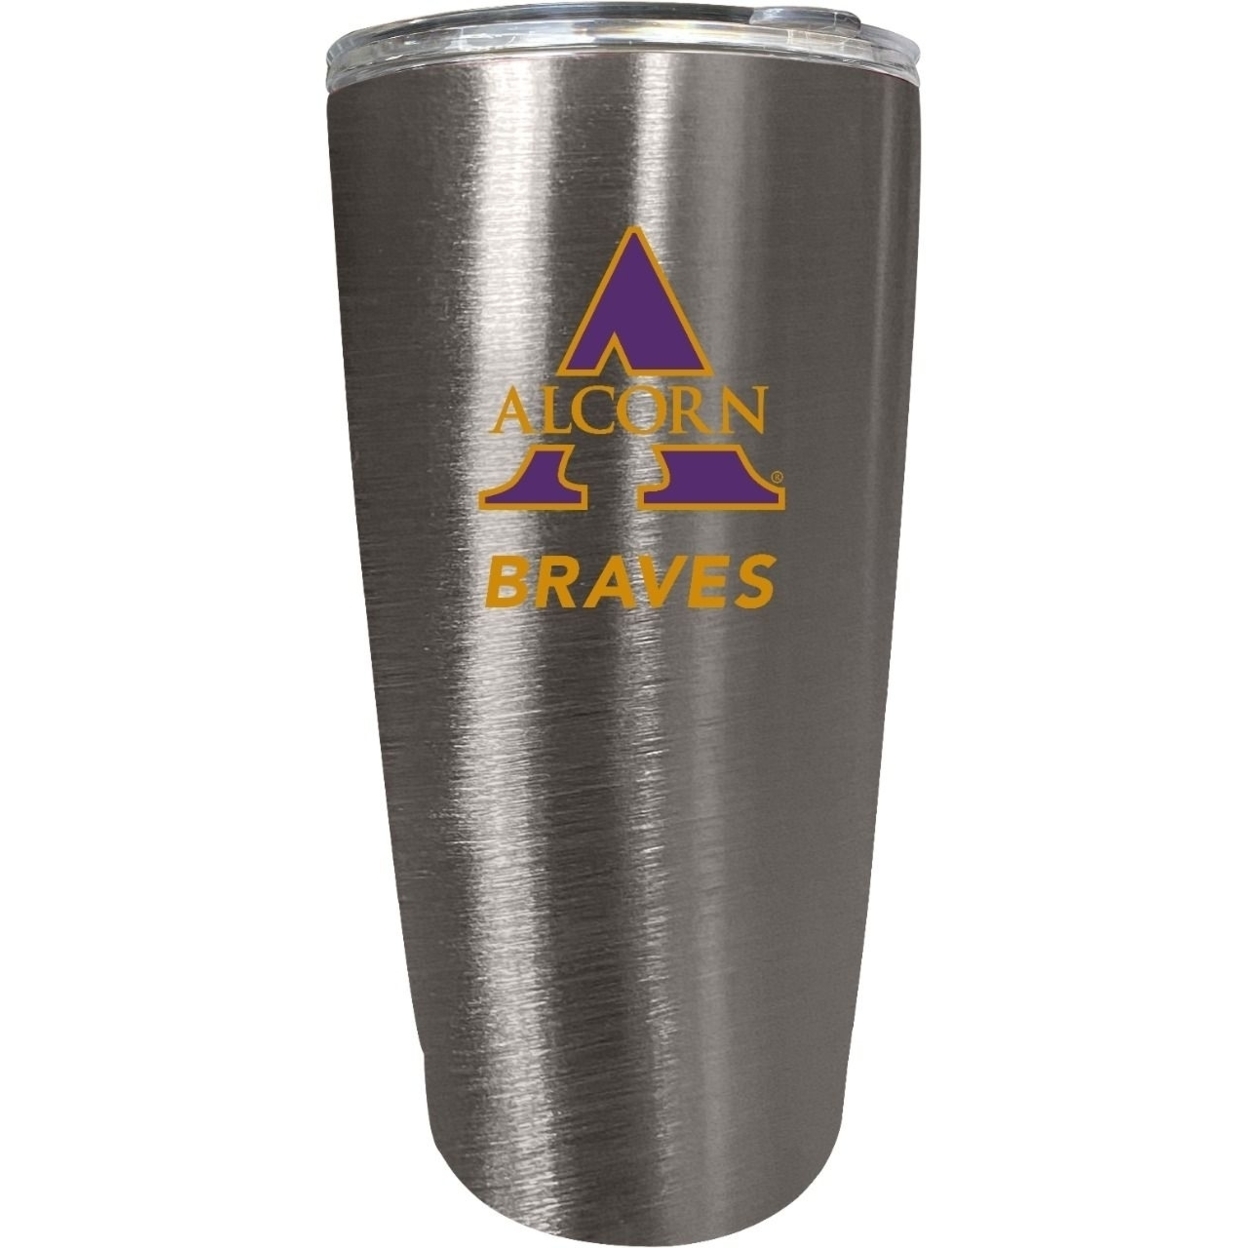 Alcorn State Braves 16 Oz Insulated Stainless Steel Tumbler Colorless